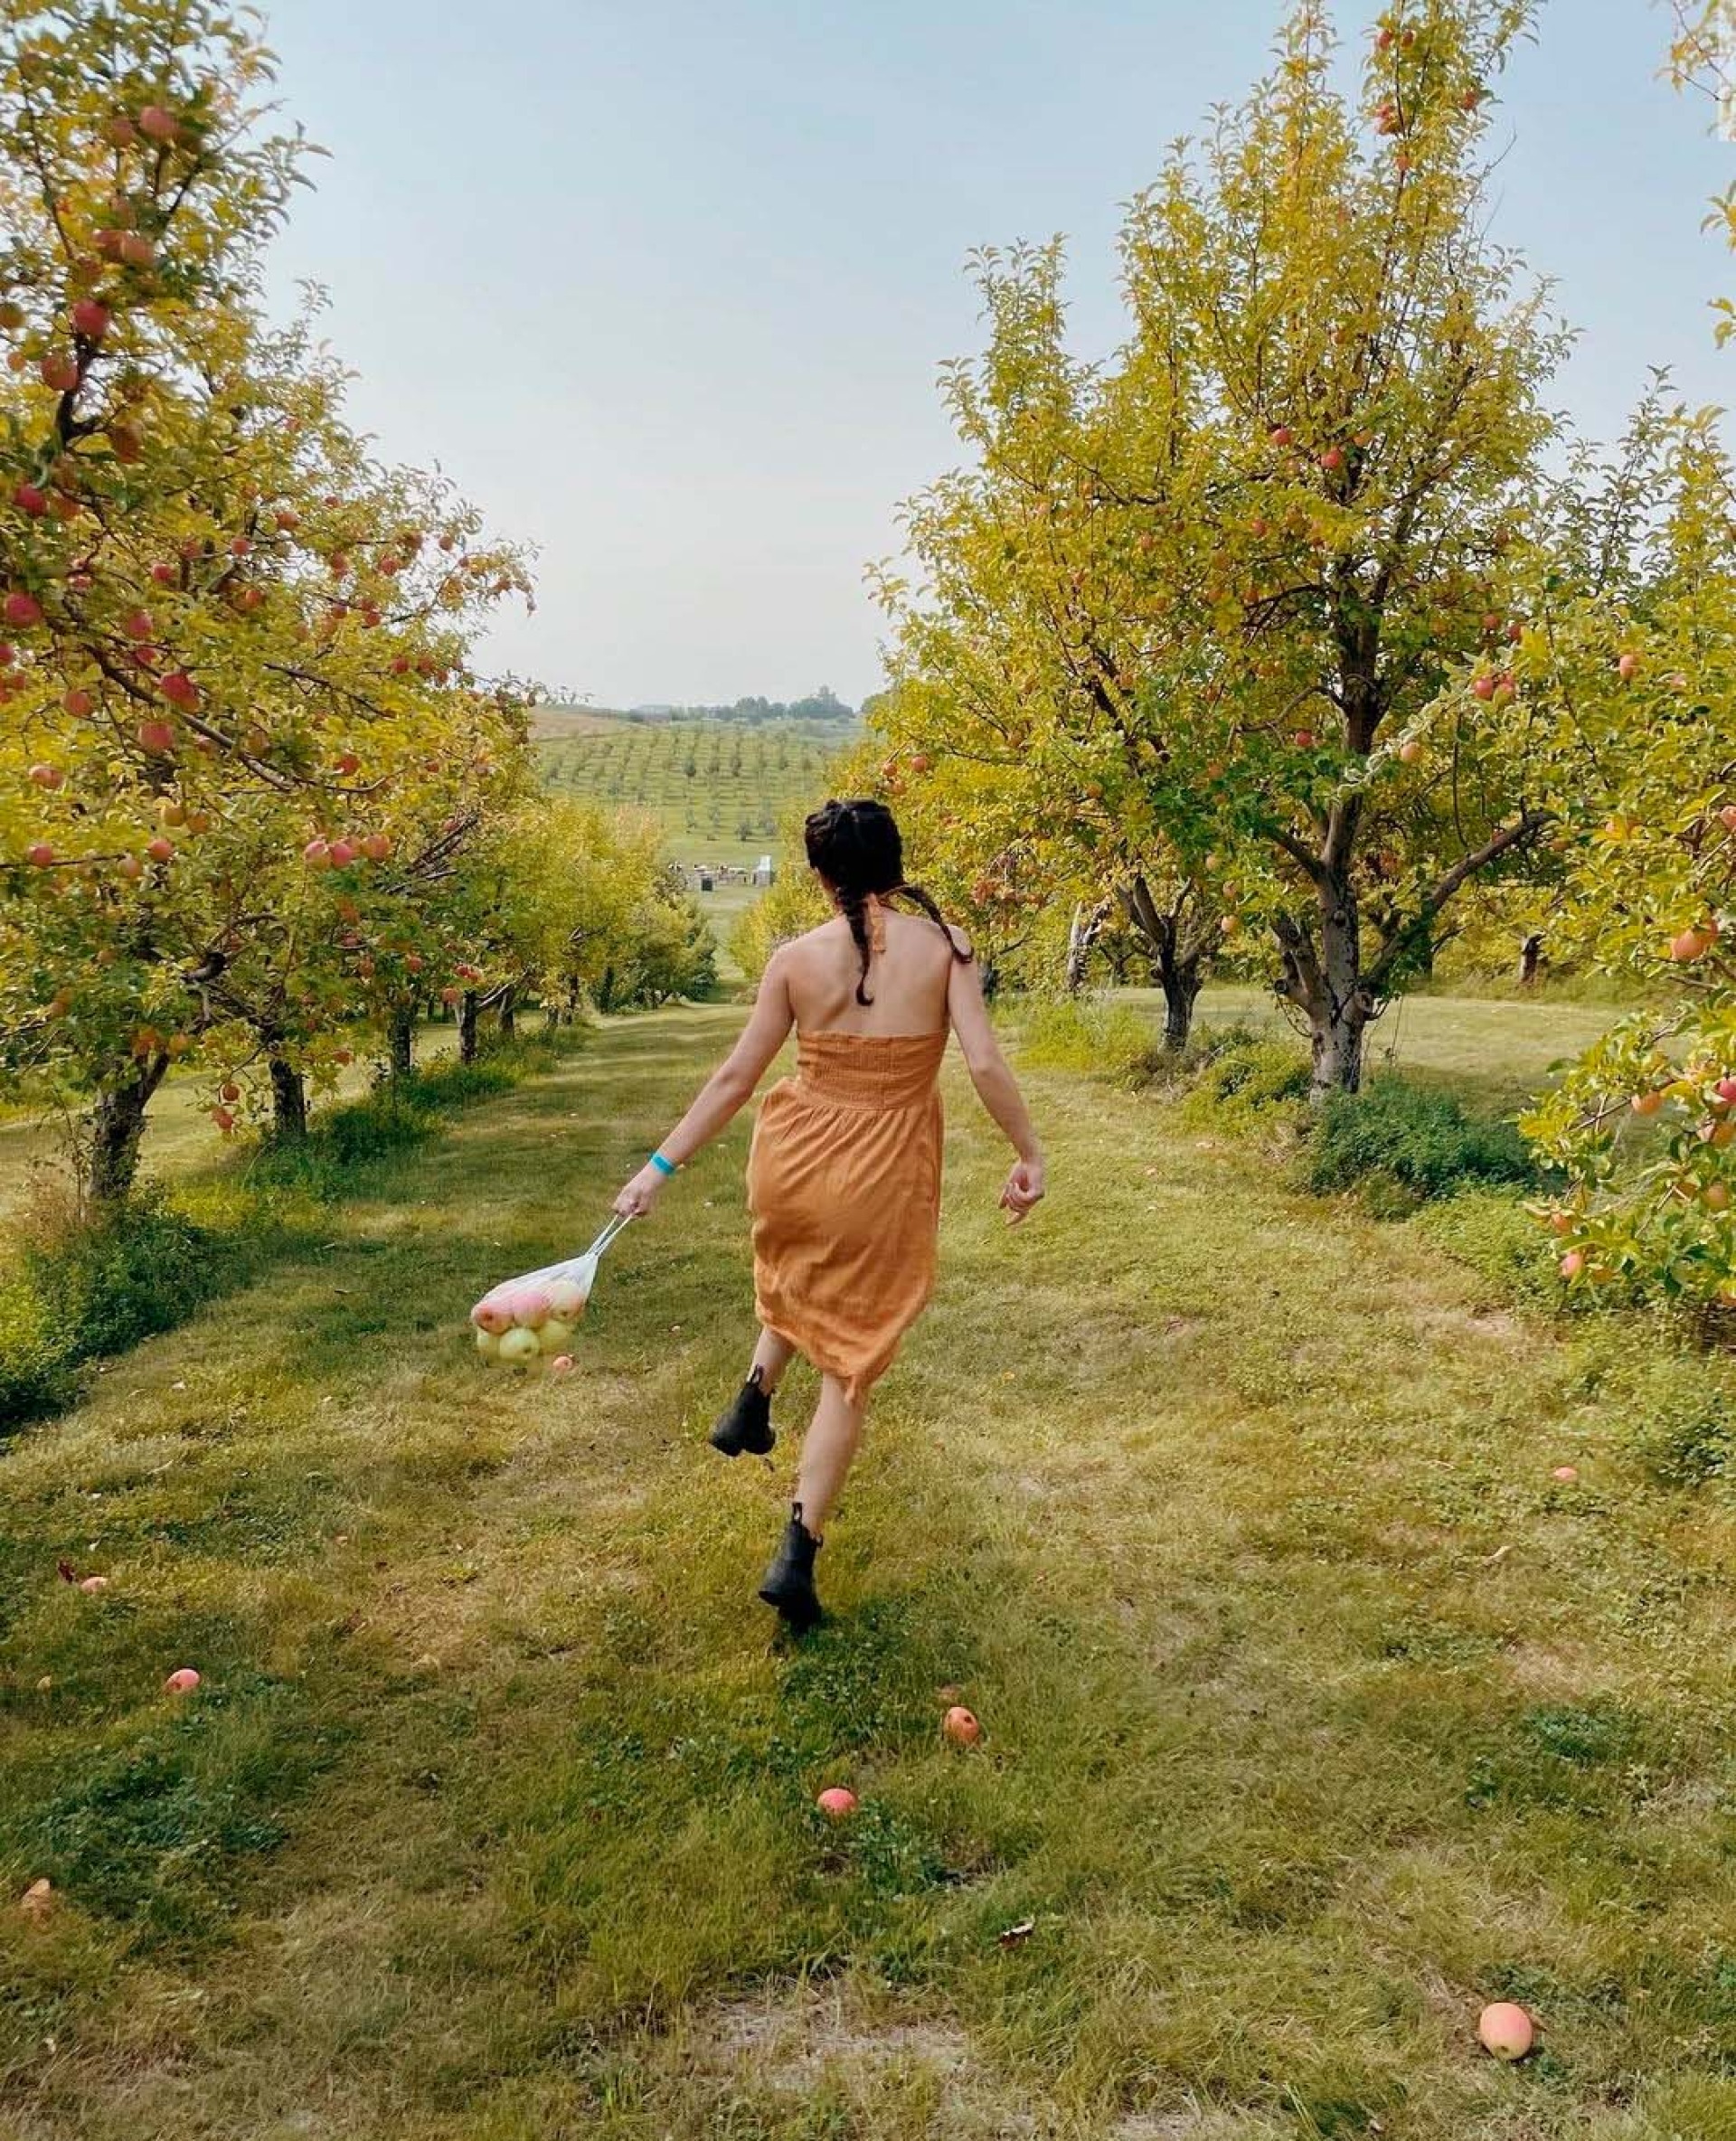 Woman dancing while picking apples